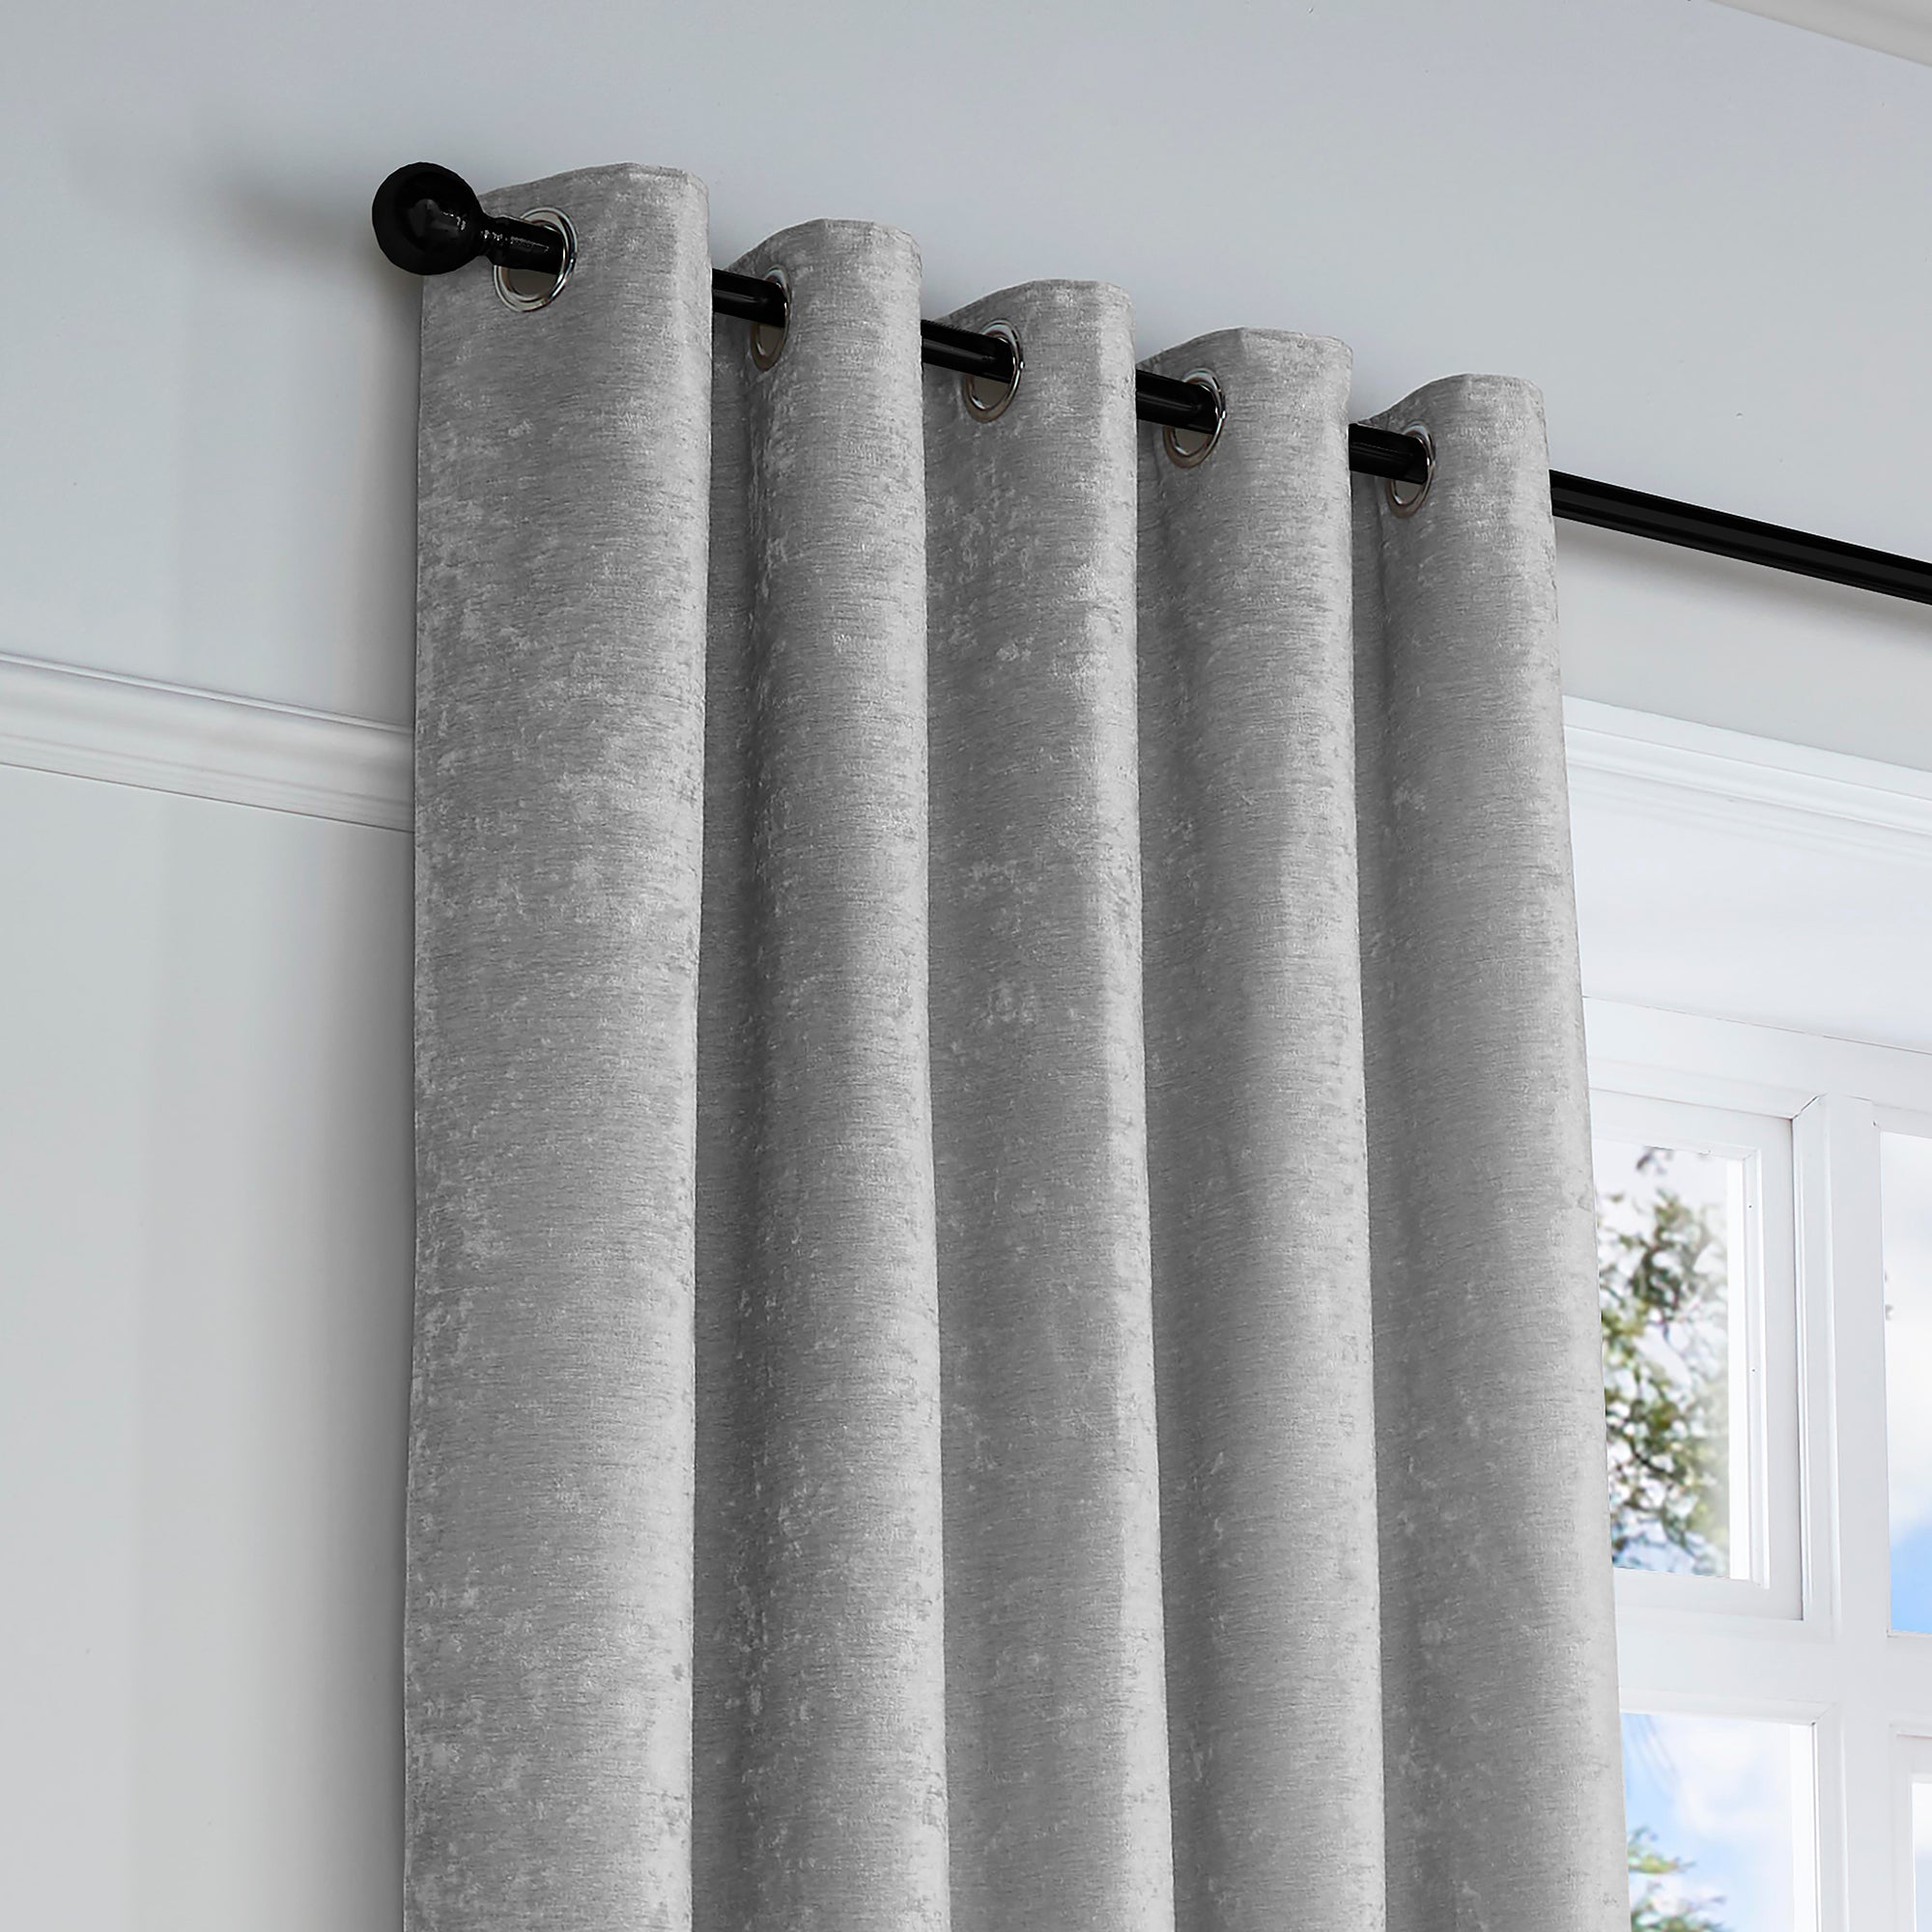 Pair of Eyelet Curtains Textured Chenille by Curtina in Grey